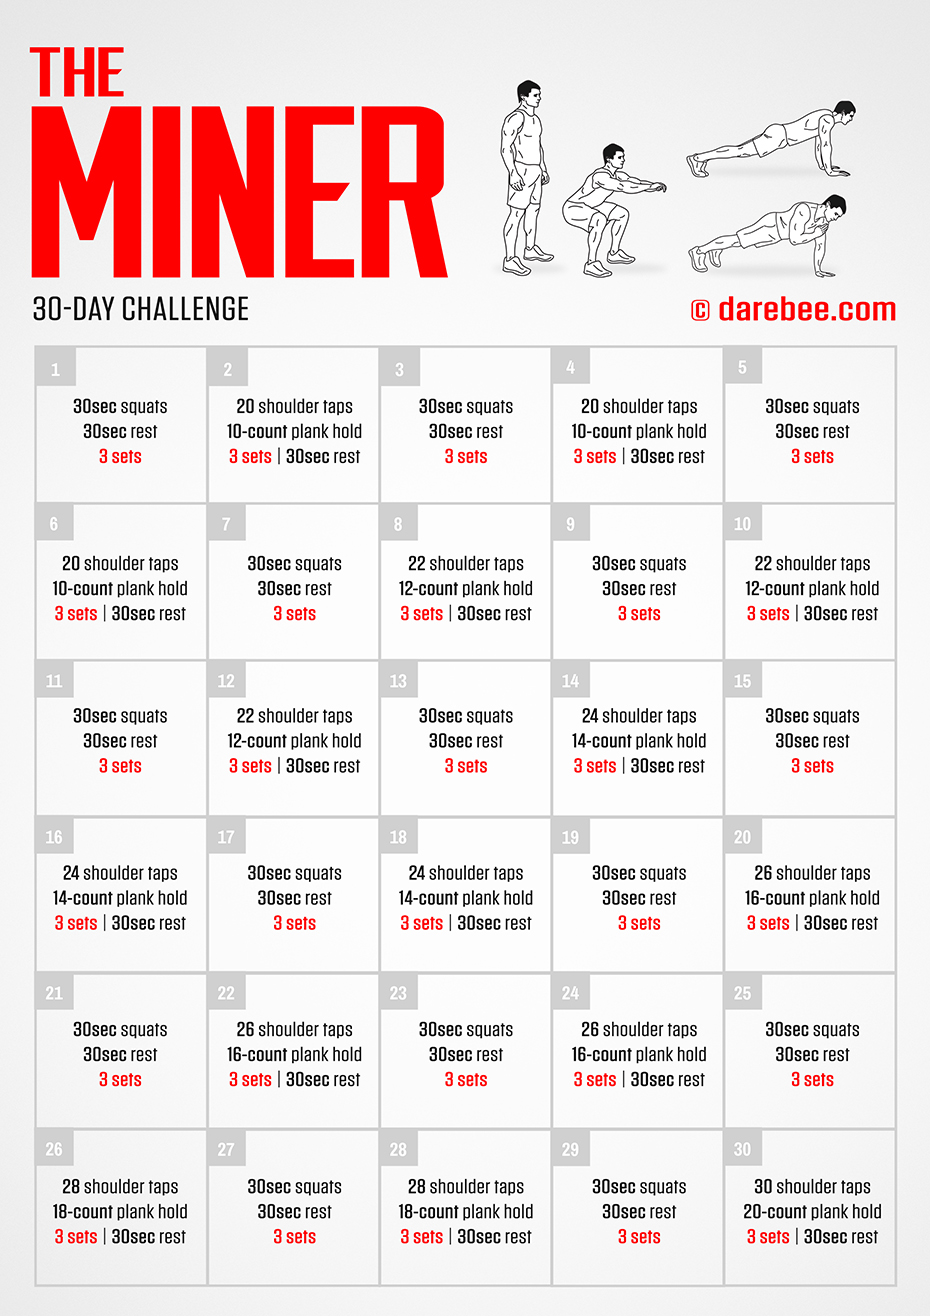 The Miner is a Darebee home-fitness monthly challenge that helps you stay physically active all month.